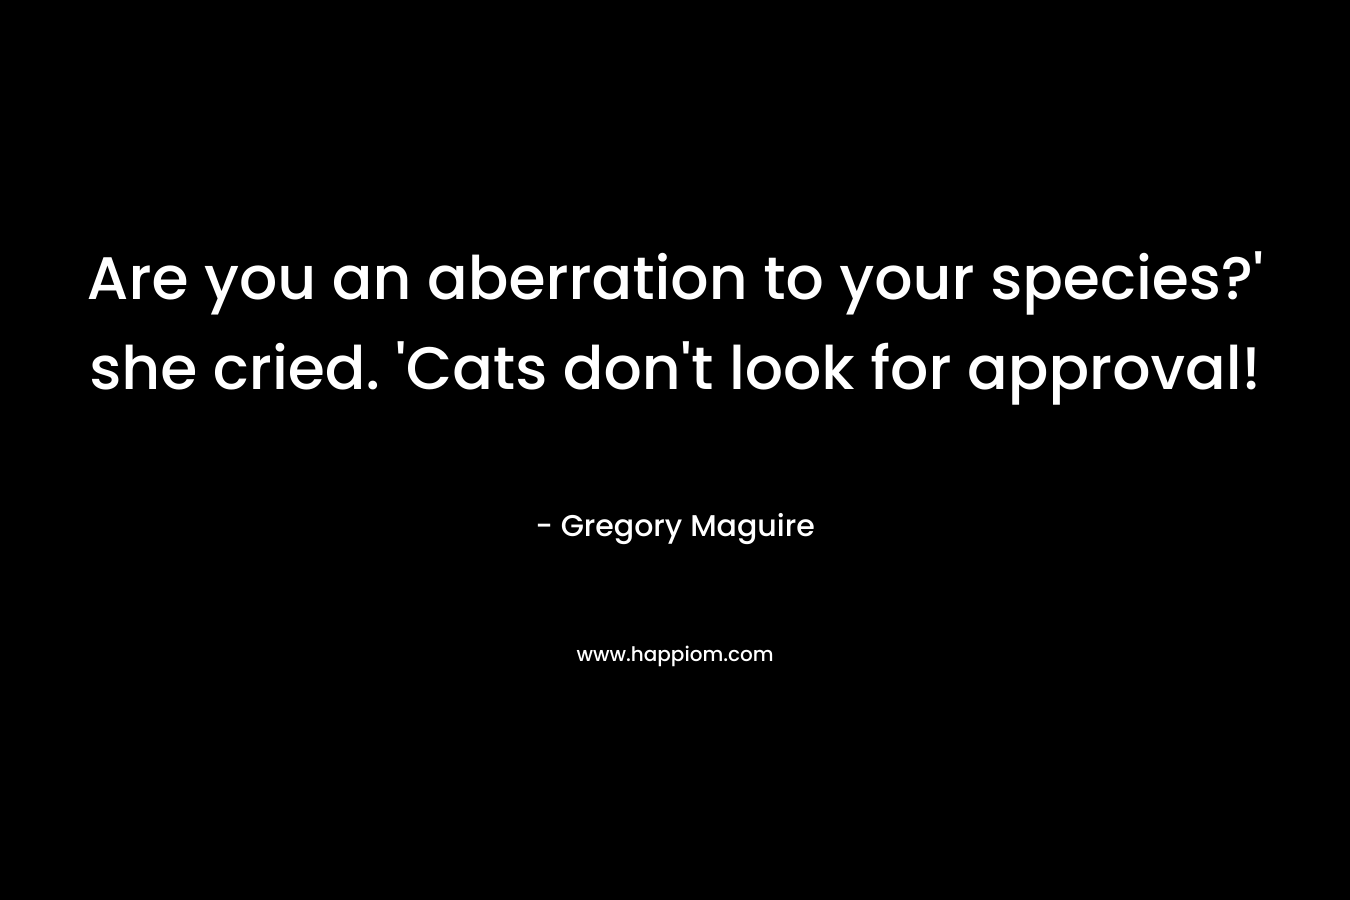 Are you an aberration to your species?’ she cried. ‘Cats don’t look for approval! – Gregory Maguire